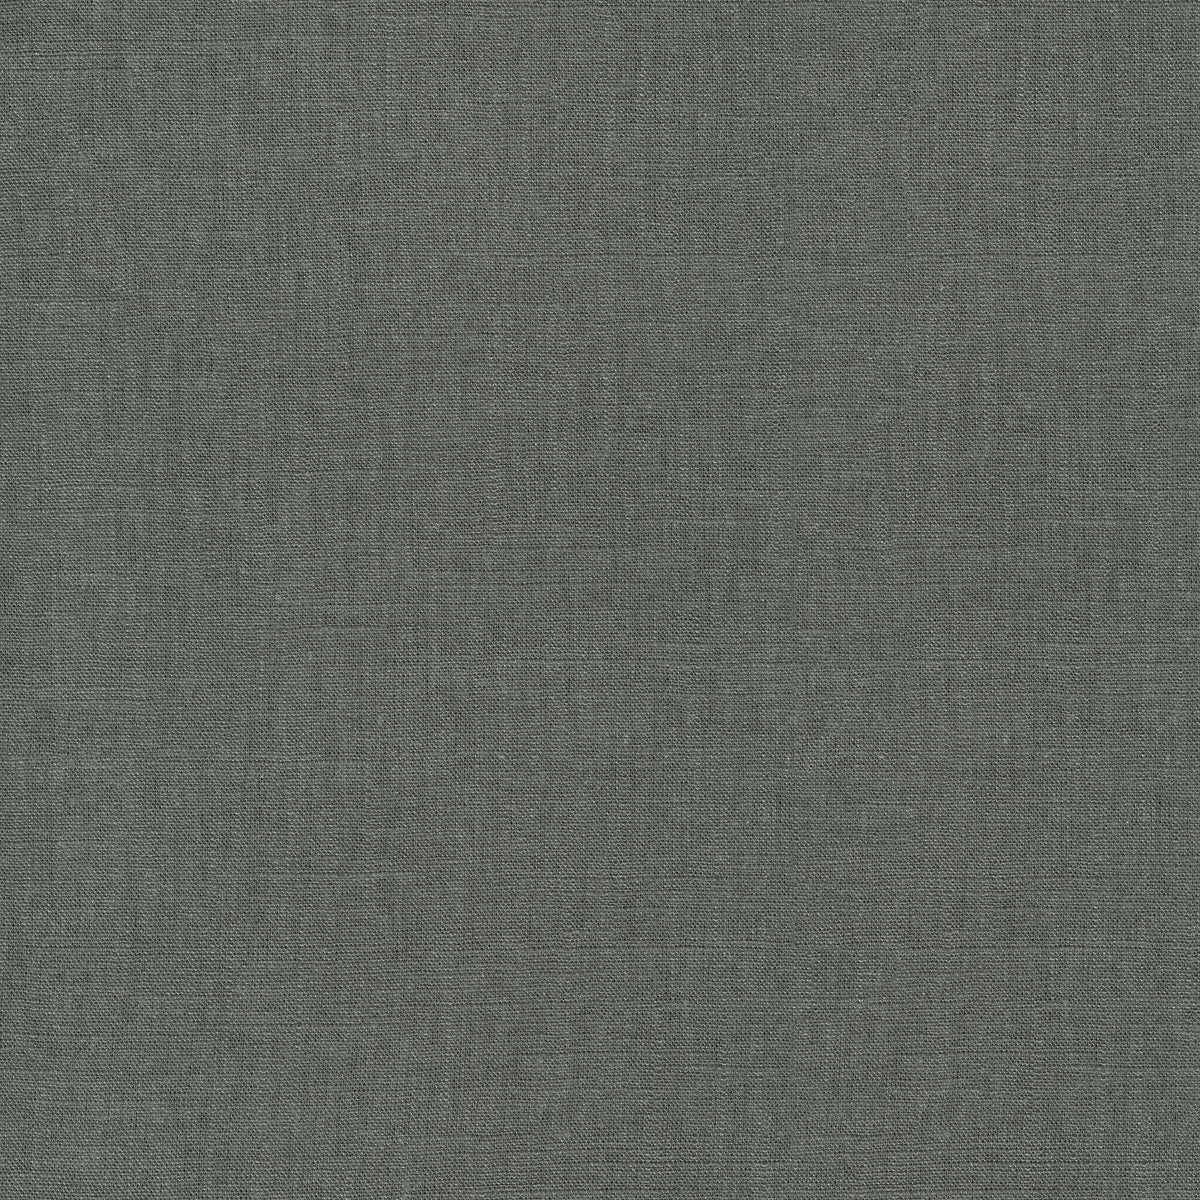 P/K Lifestyles Chester - Charcoal 412063 Fabric Swatch